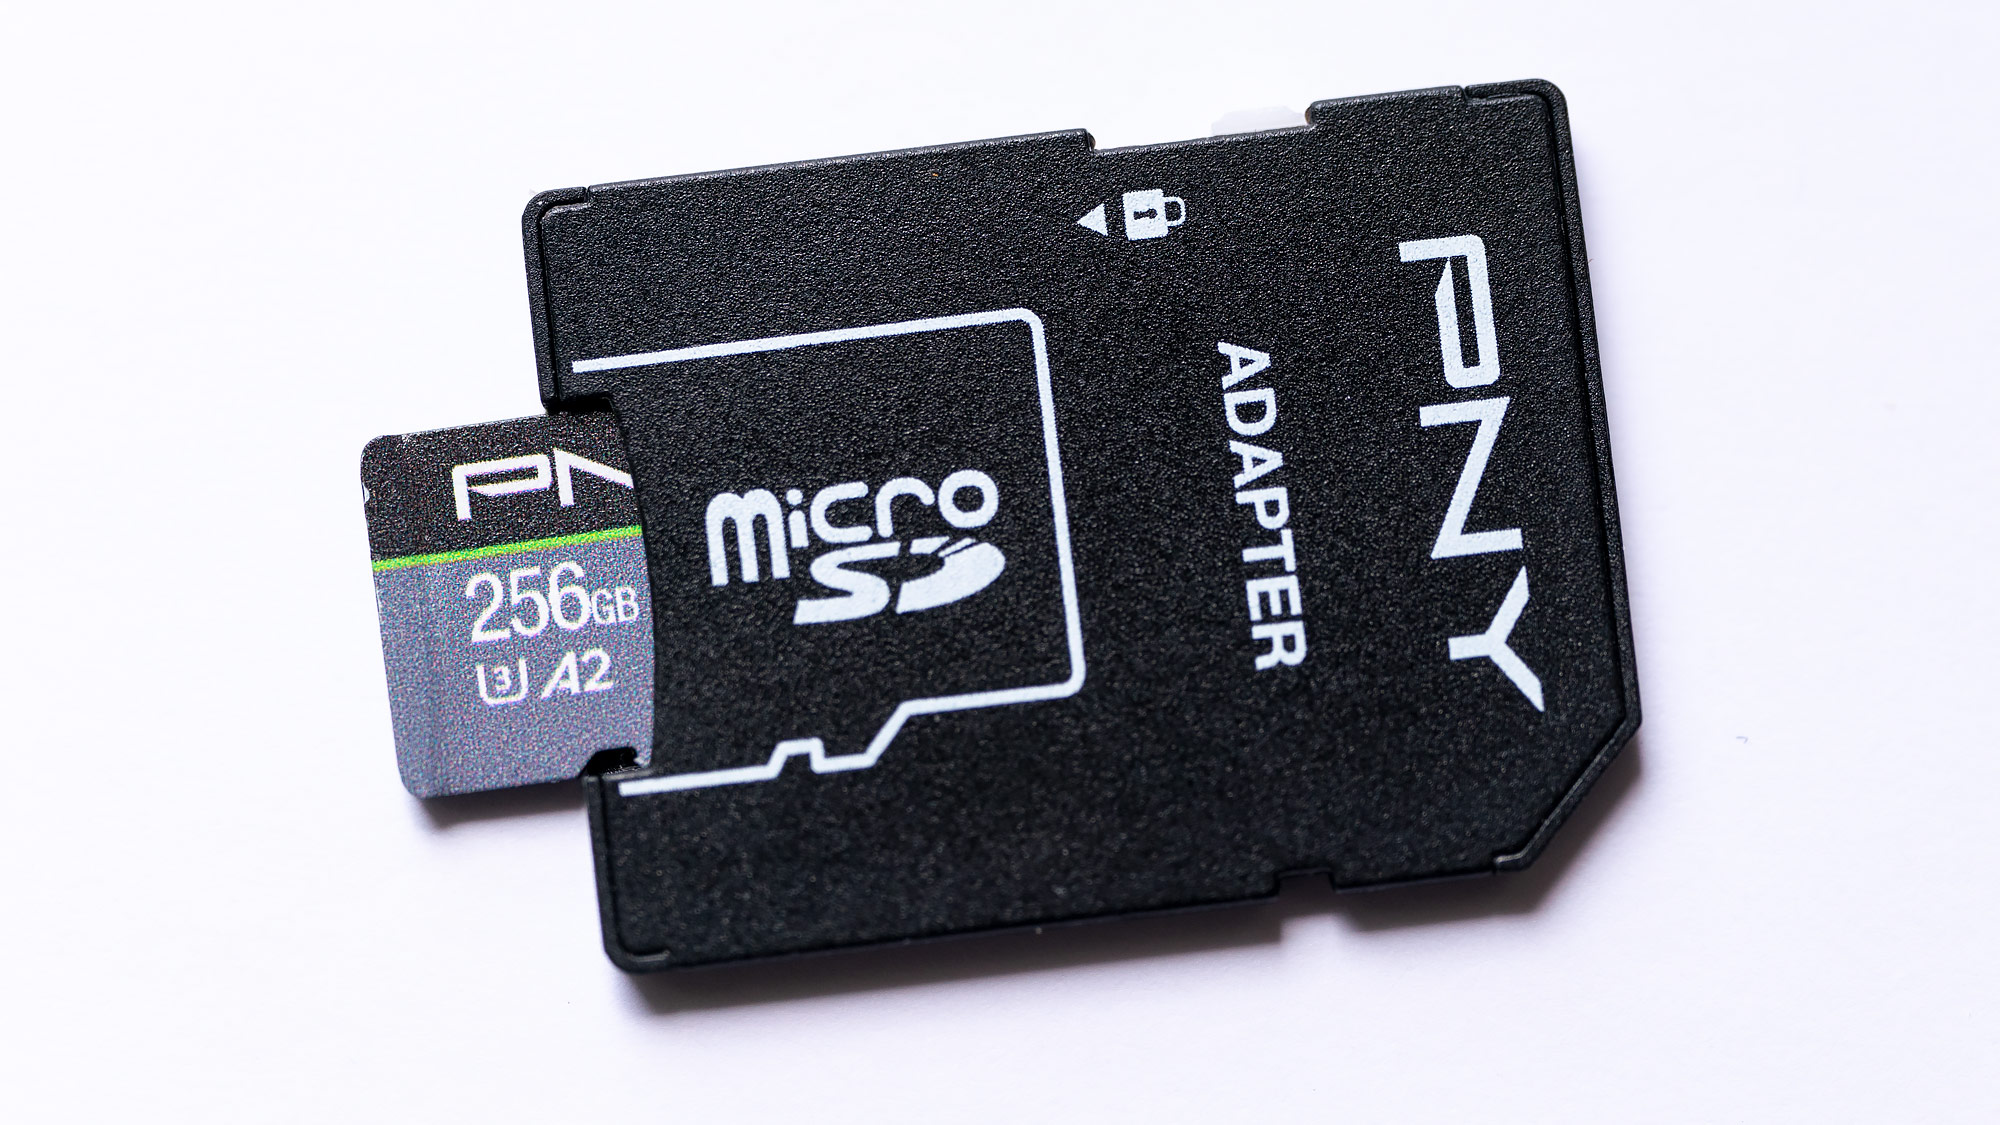 PNY PRO Elite MicroSD Cards: Are They Good? - Light And Matter